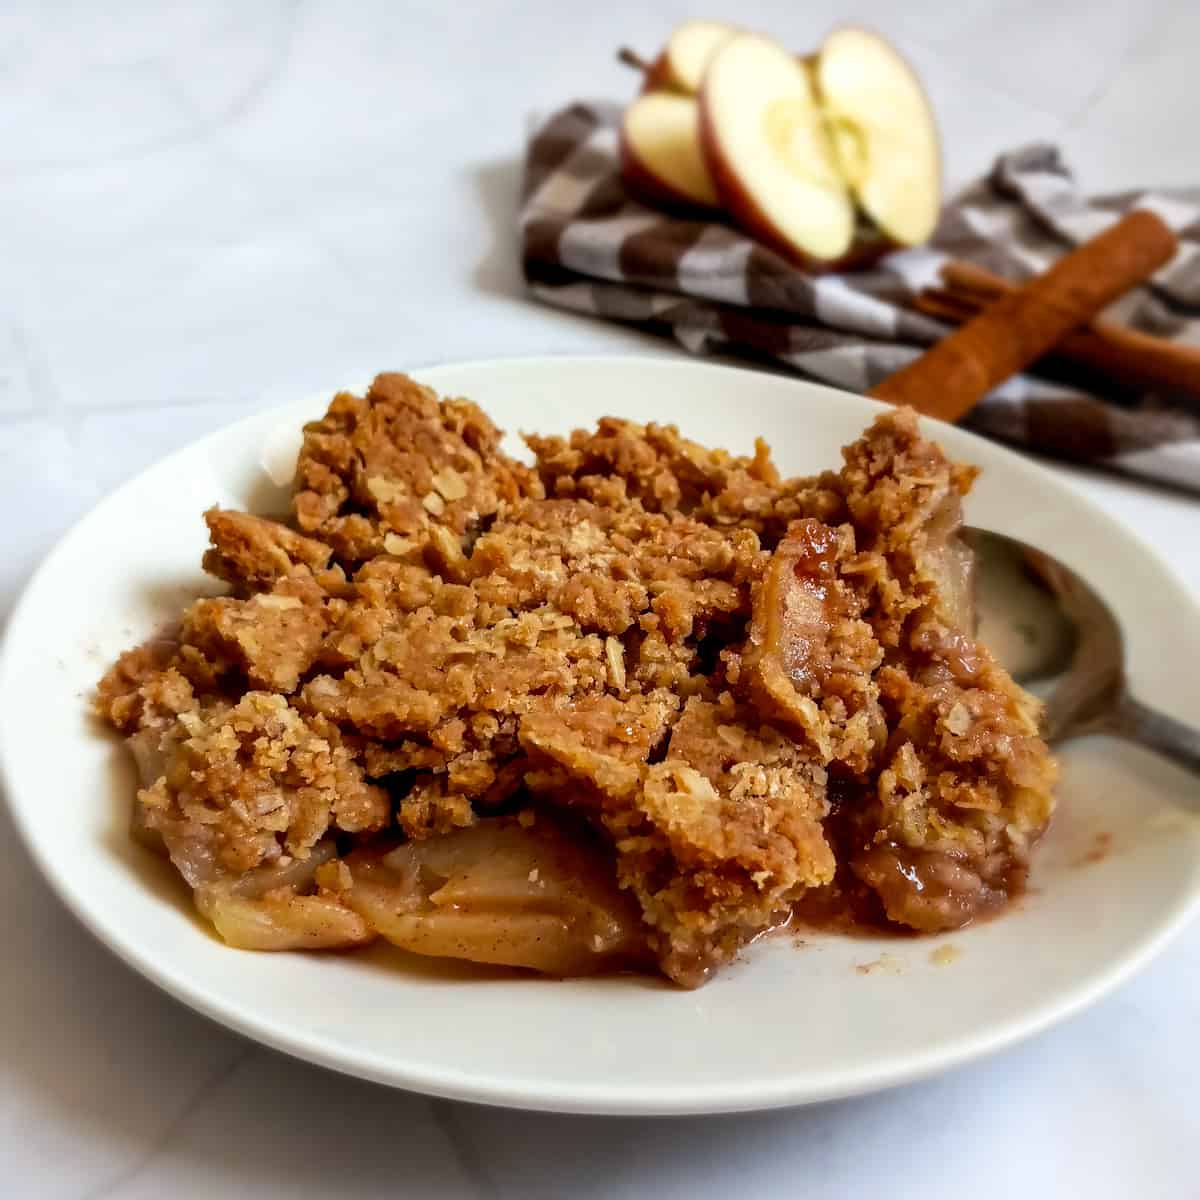 Amish apple crisp on a plate, apples and cinnamon sticks in the background